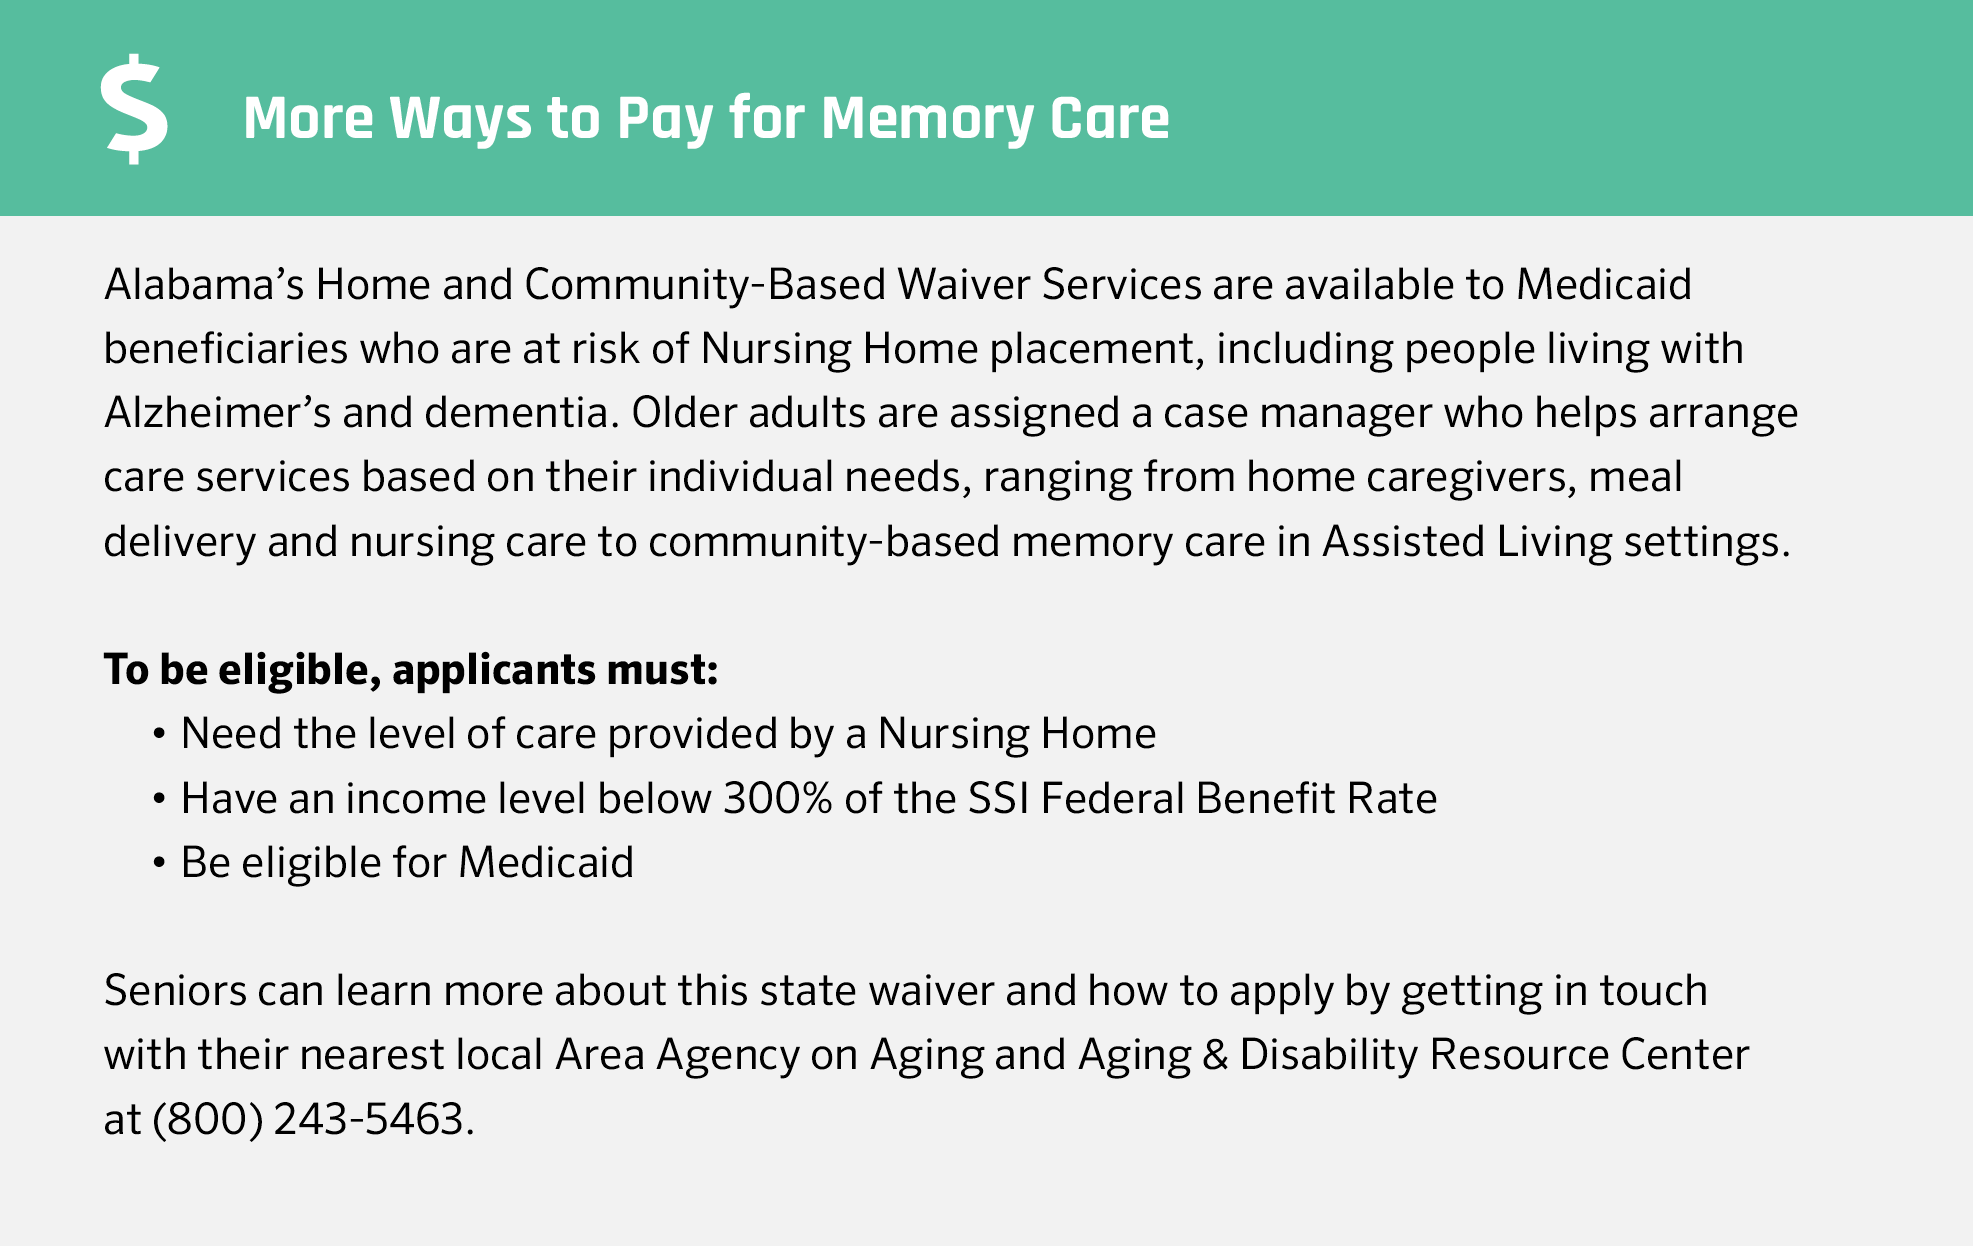 Memory care financial assistance in Alabama